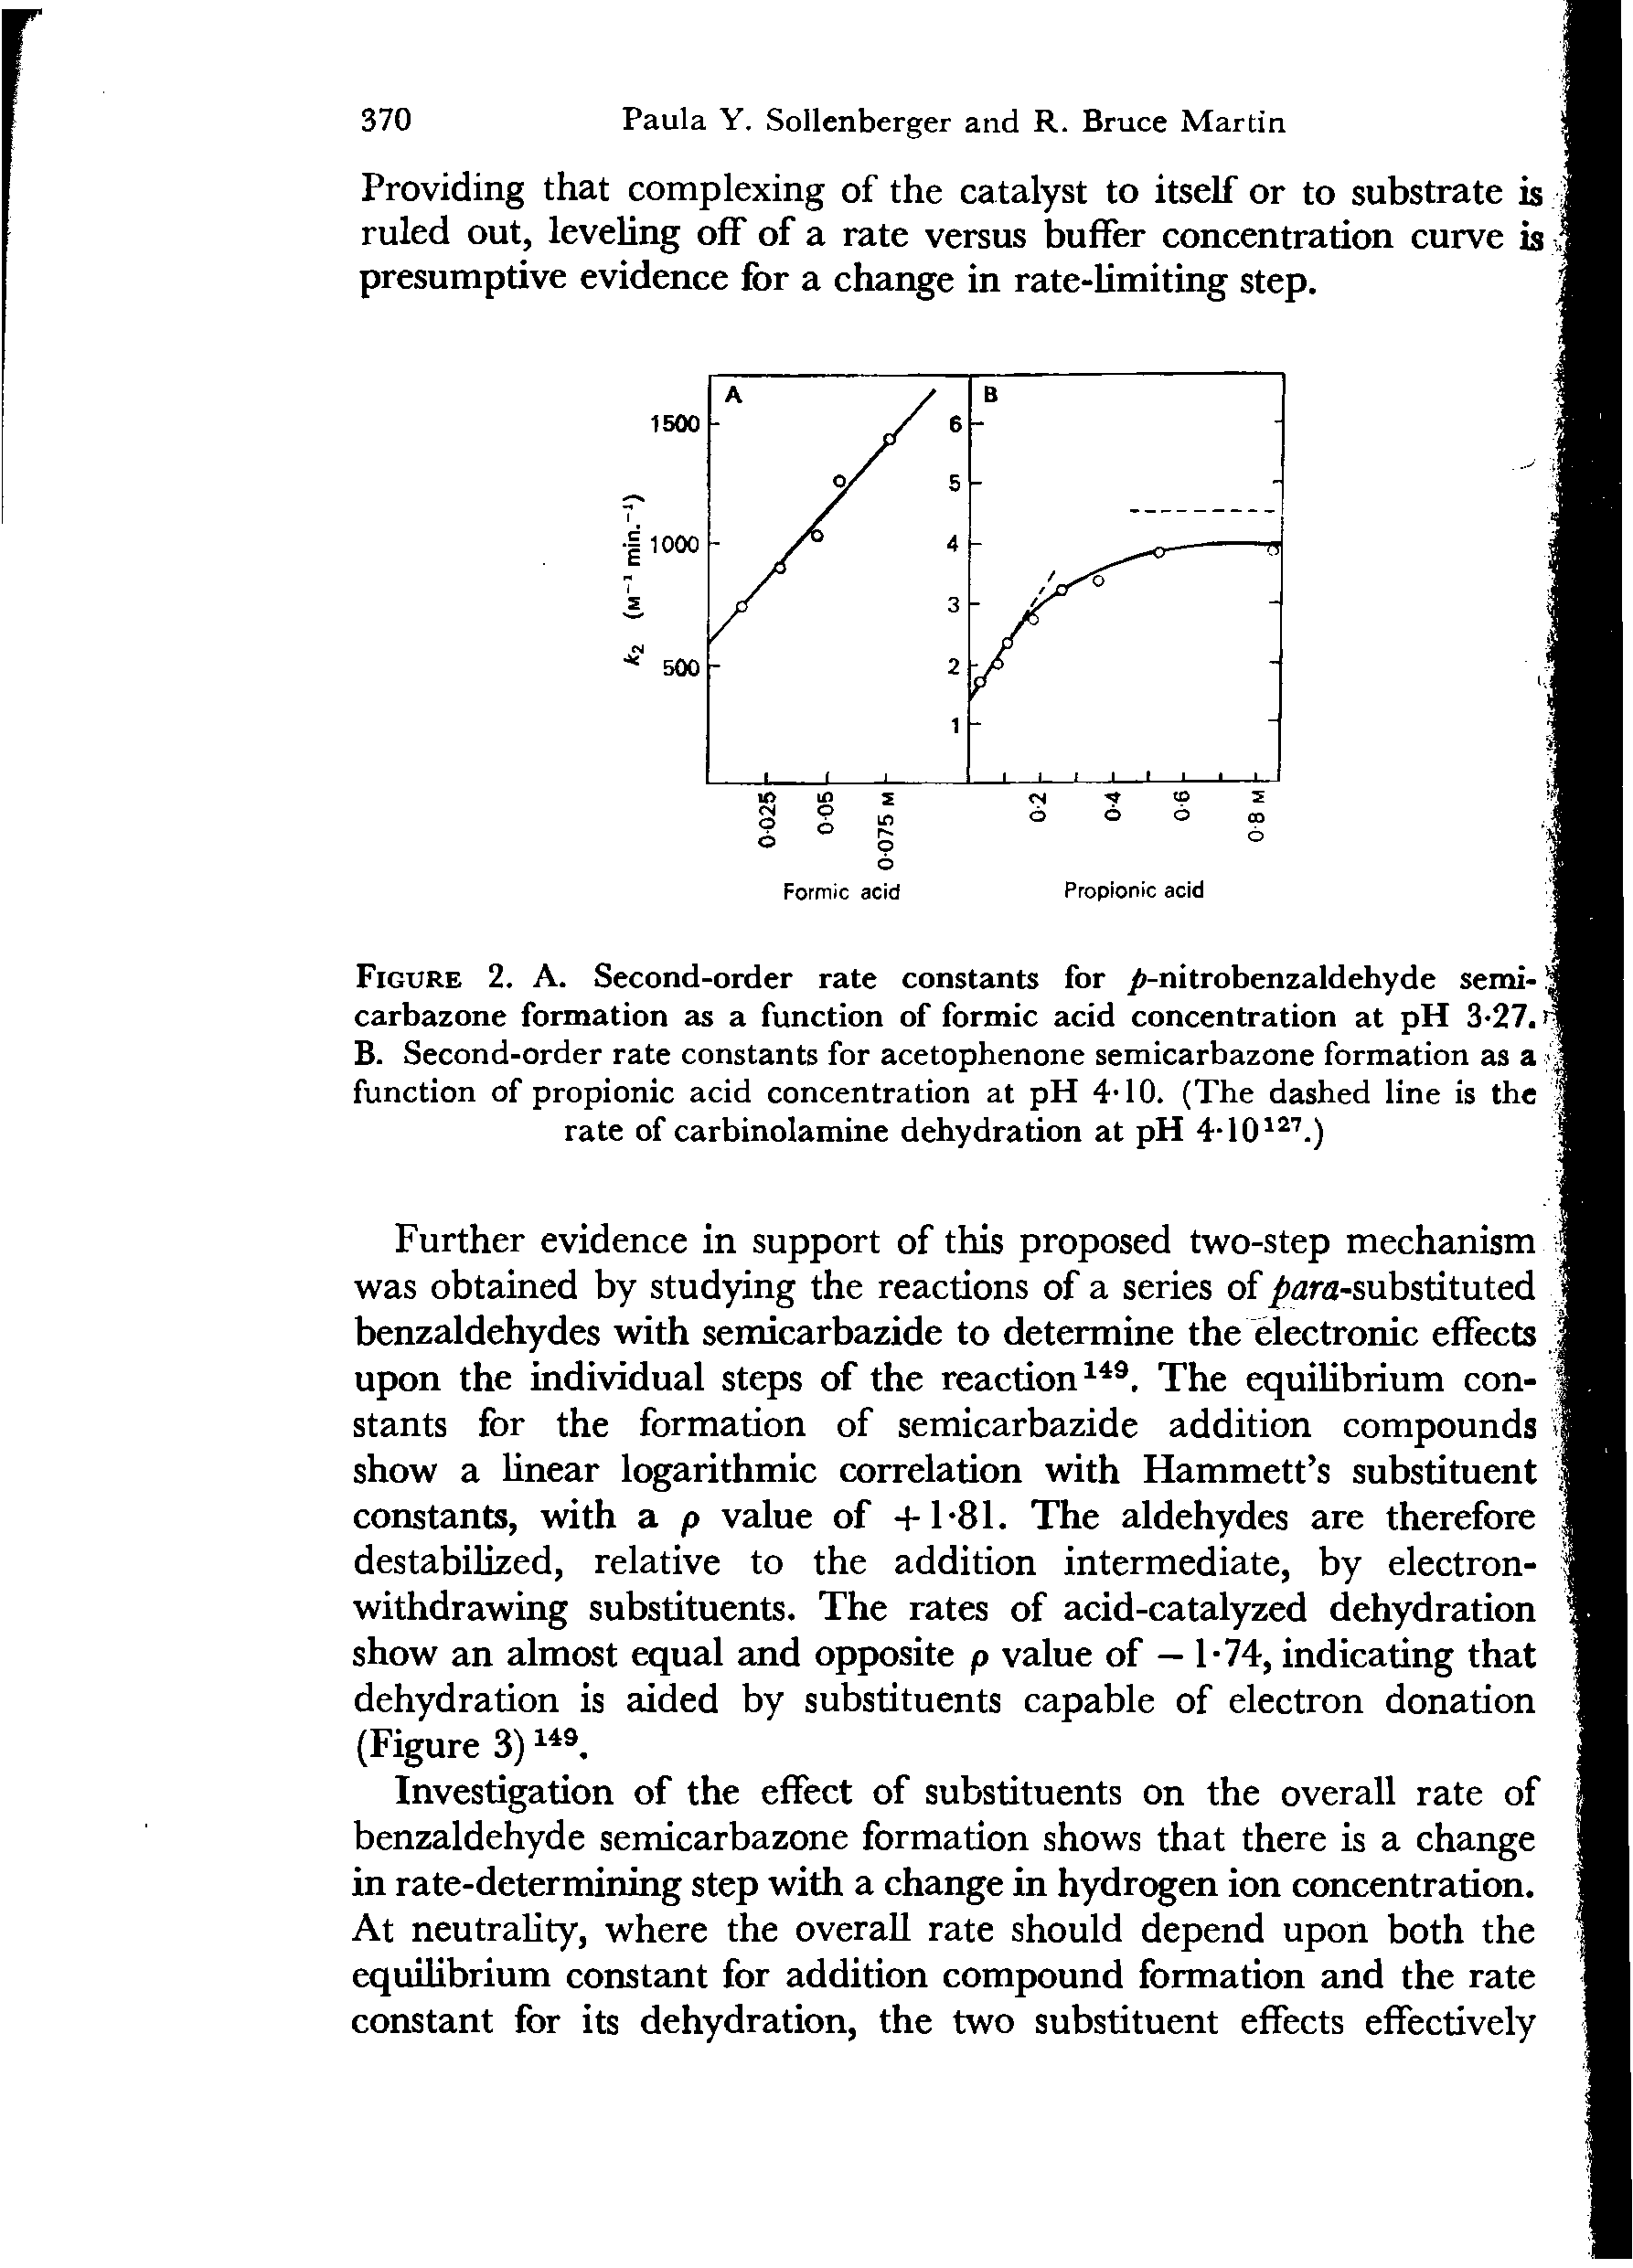 Figure 2. A. Second-order rate constants for nitrobenzaldehyde semi-J carbazone formation as a function of formic acid concentration at pH 3-27. r B. Second-order rate constants for acetophenone semicarbazone formation as a function of propionic acid concentration at pH 4-10. (The dashed line is the rate of carbinolamine dehydration at pH 4-10 . )...